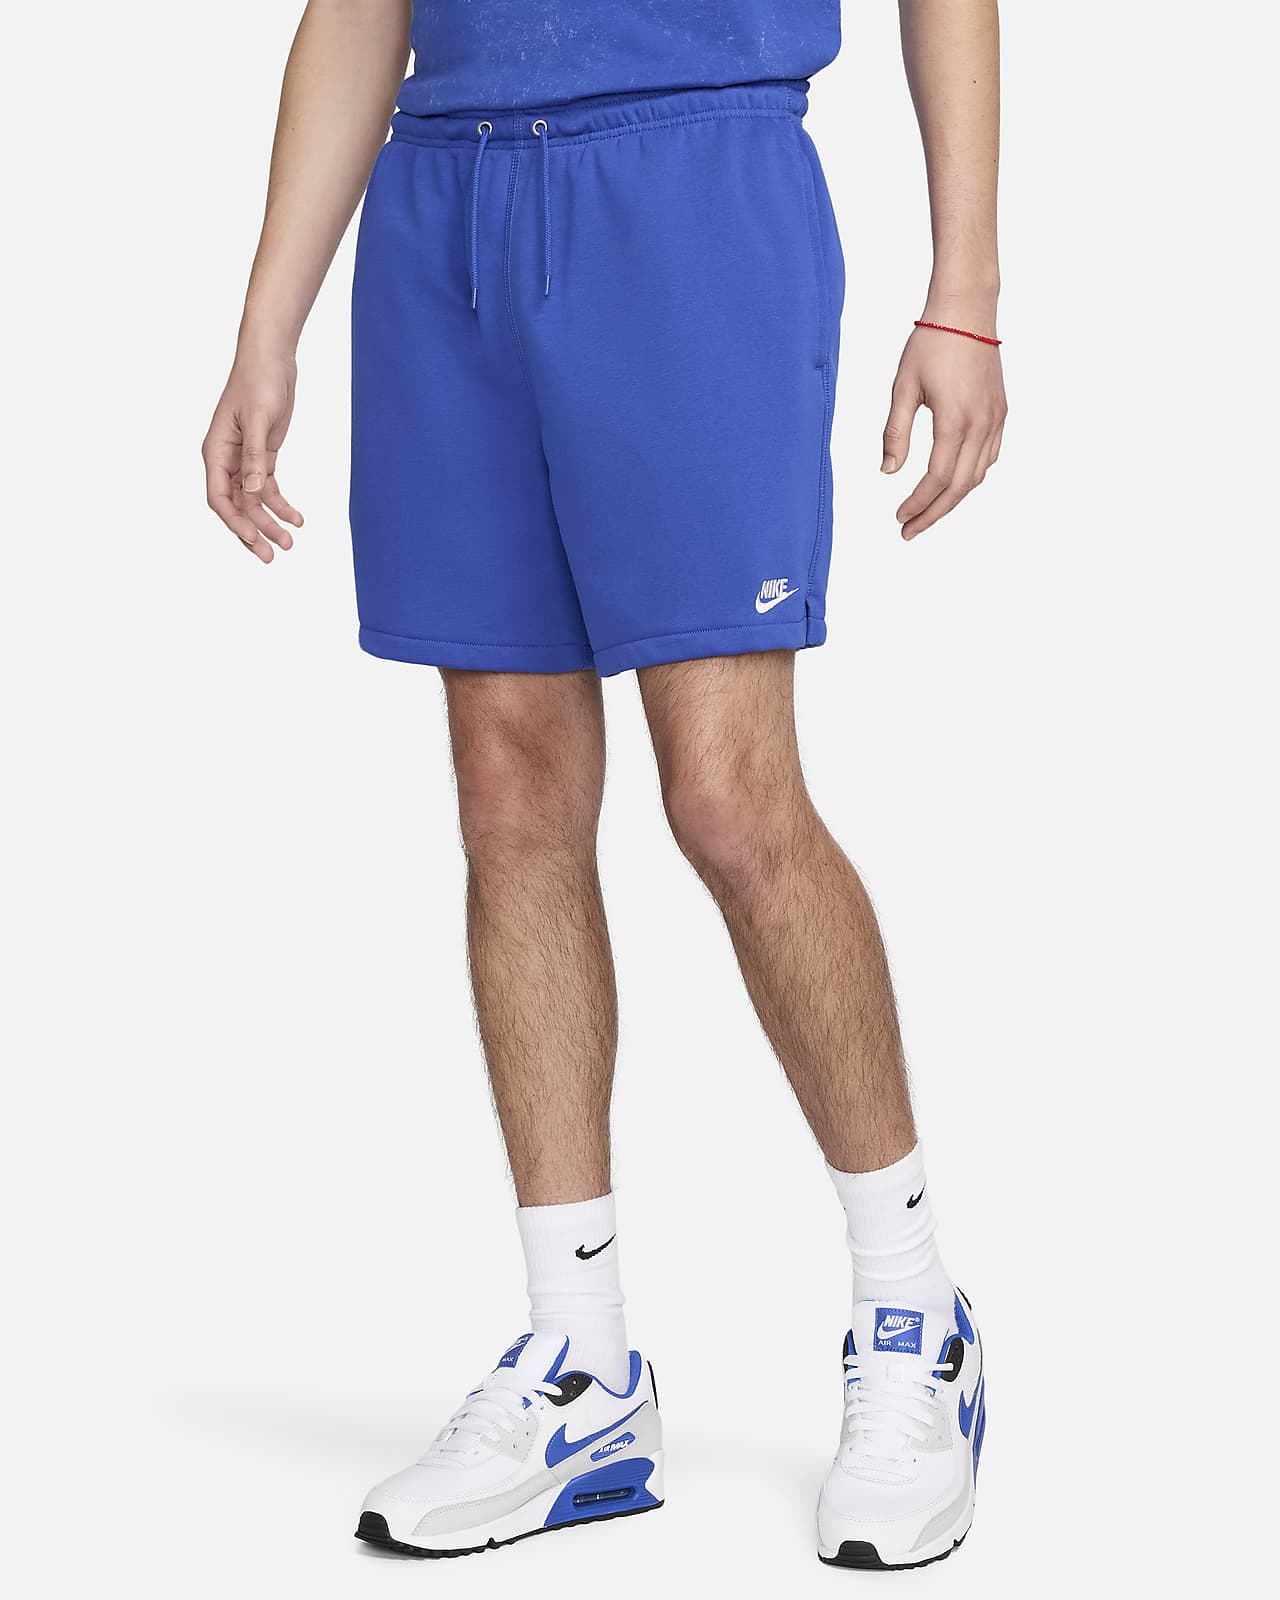 Shorts Flow in French Terry Nike Club – Uomo